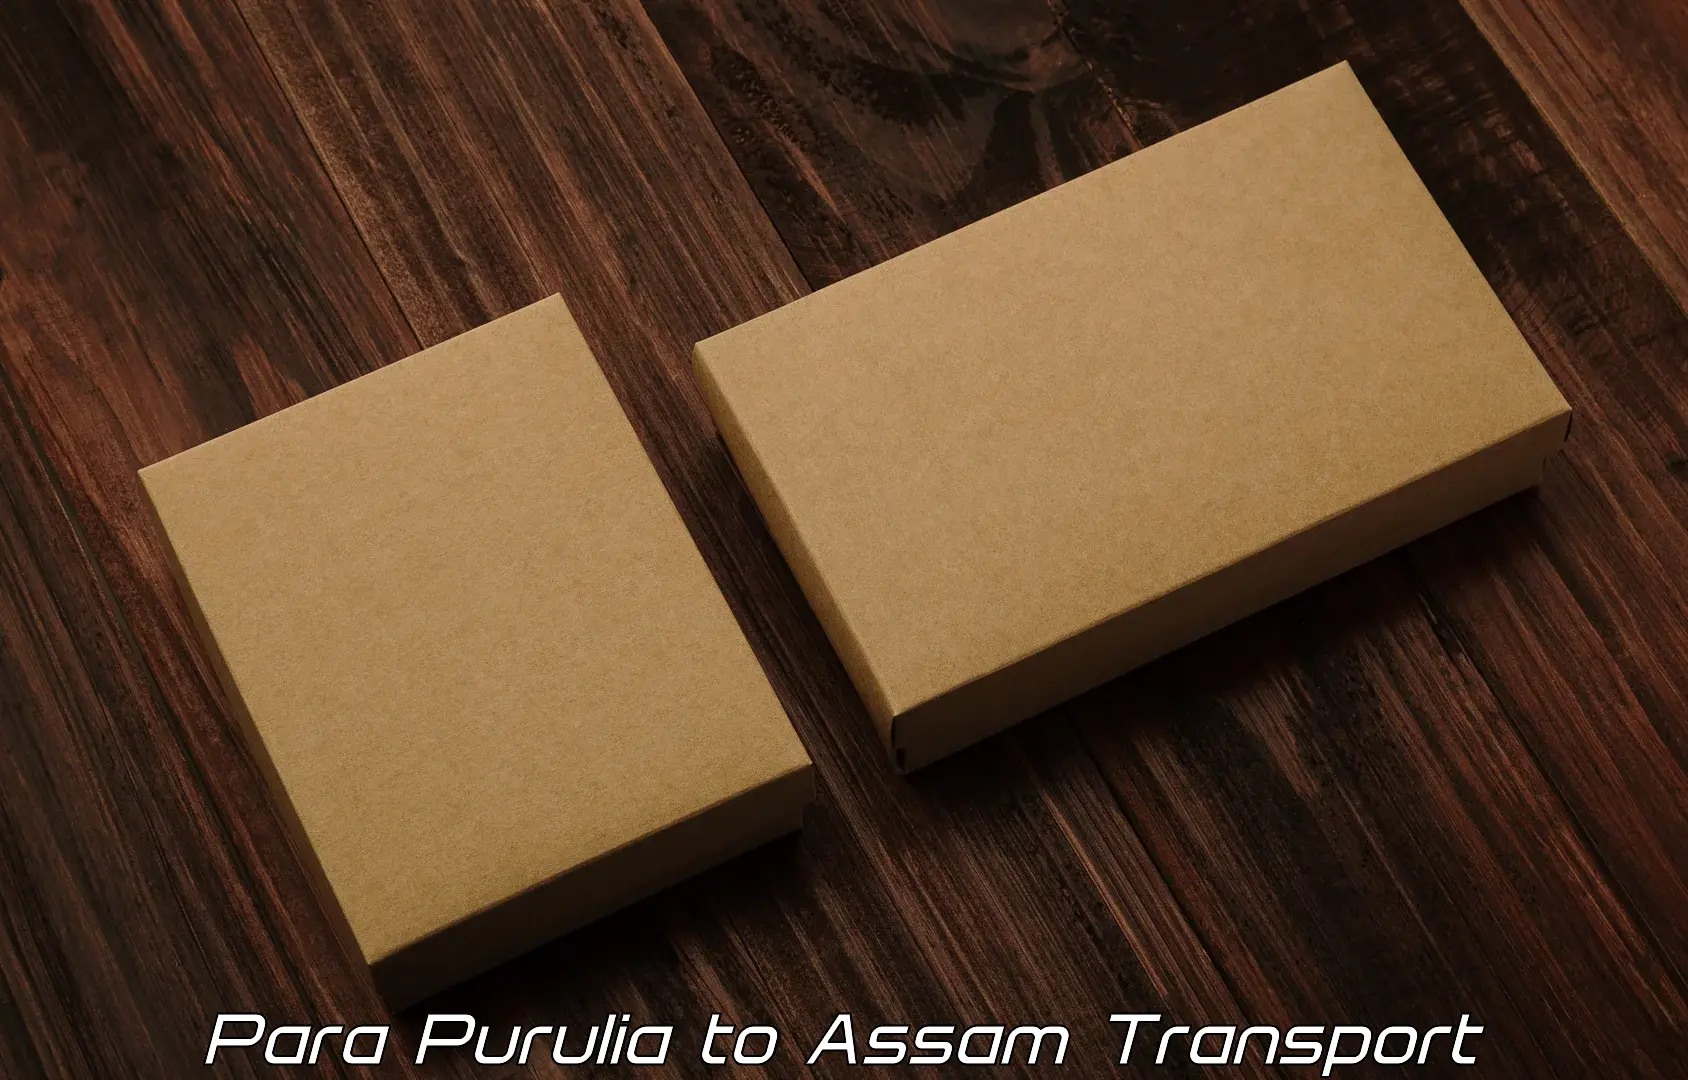 Shipping services in Para Purulia to Moranhat